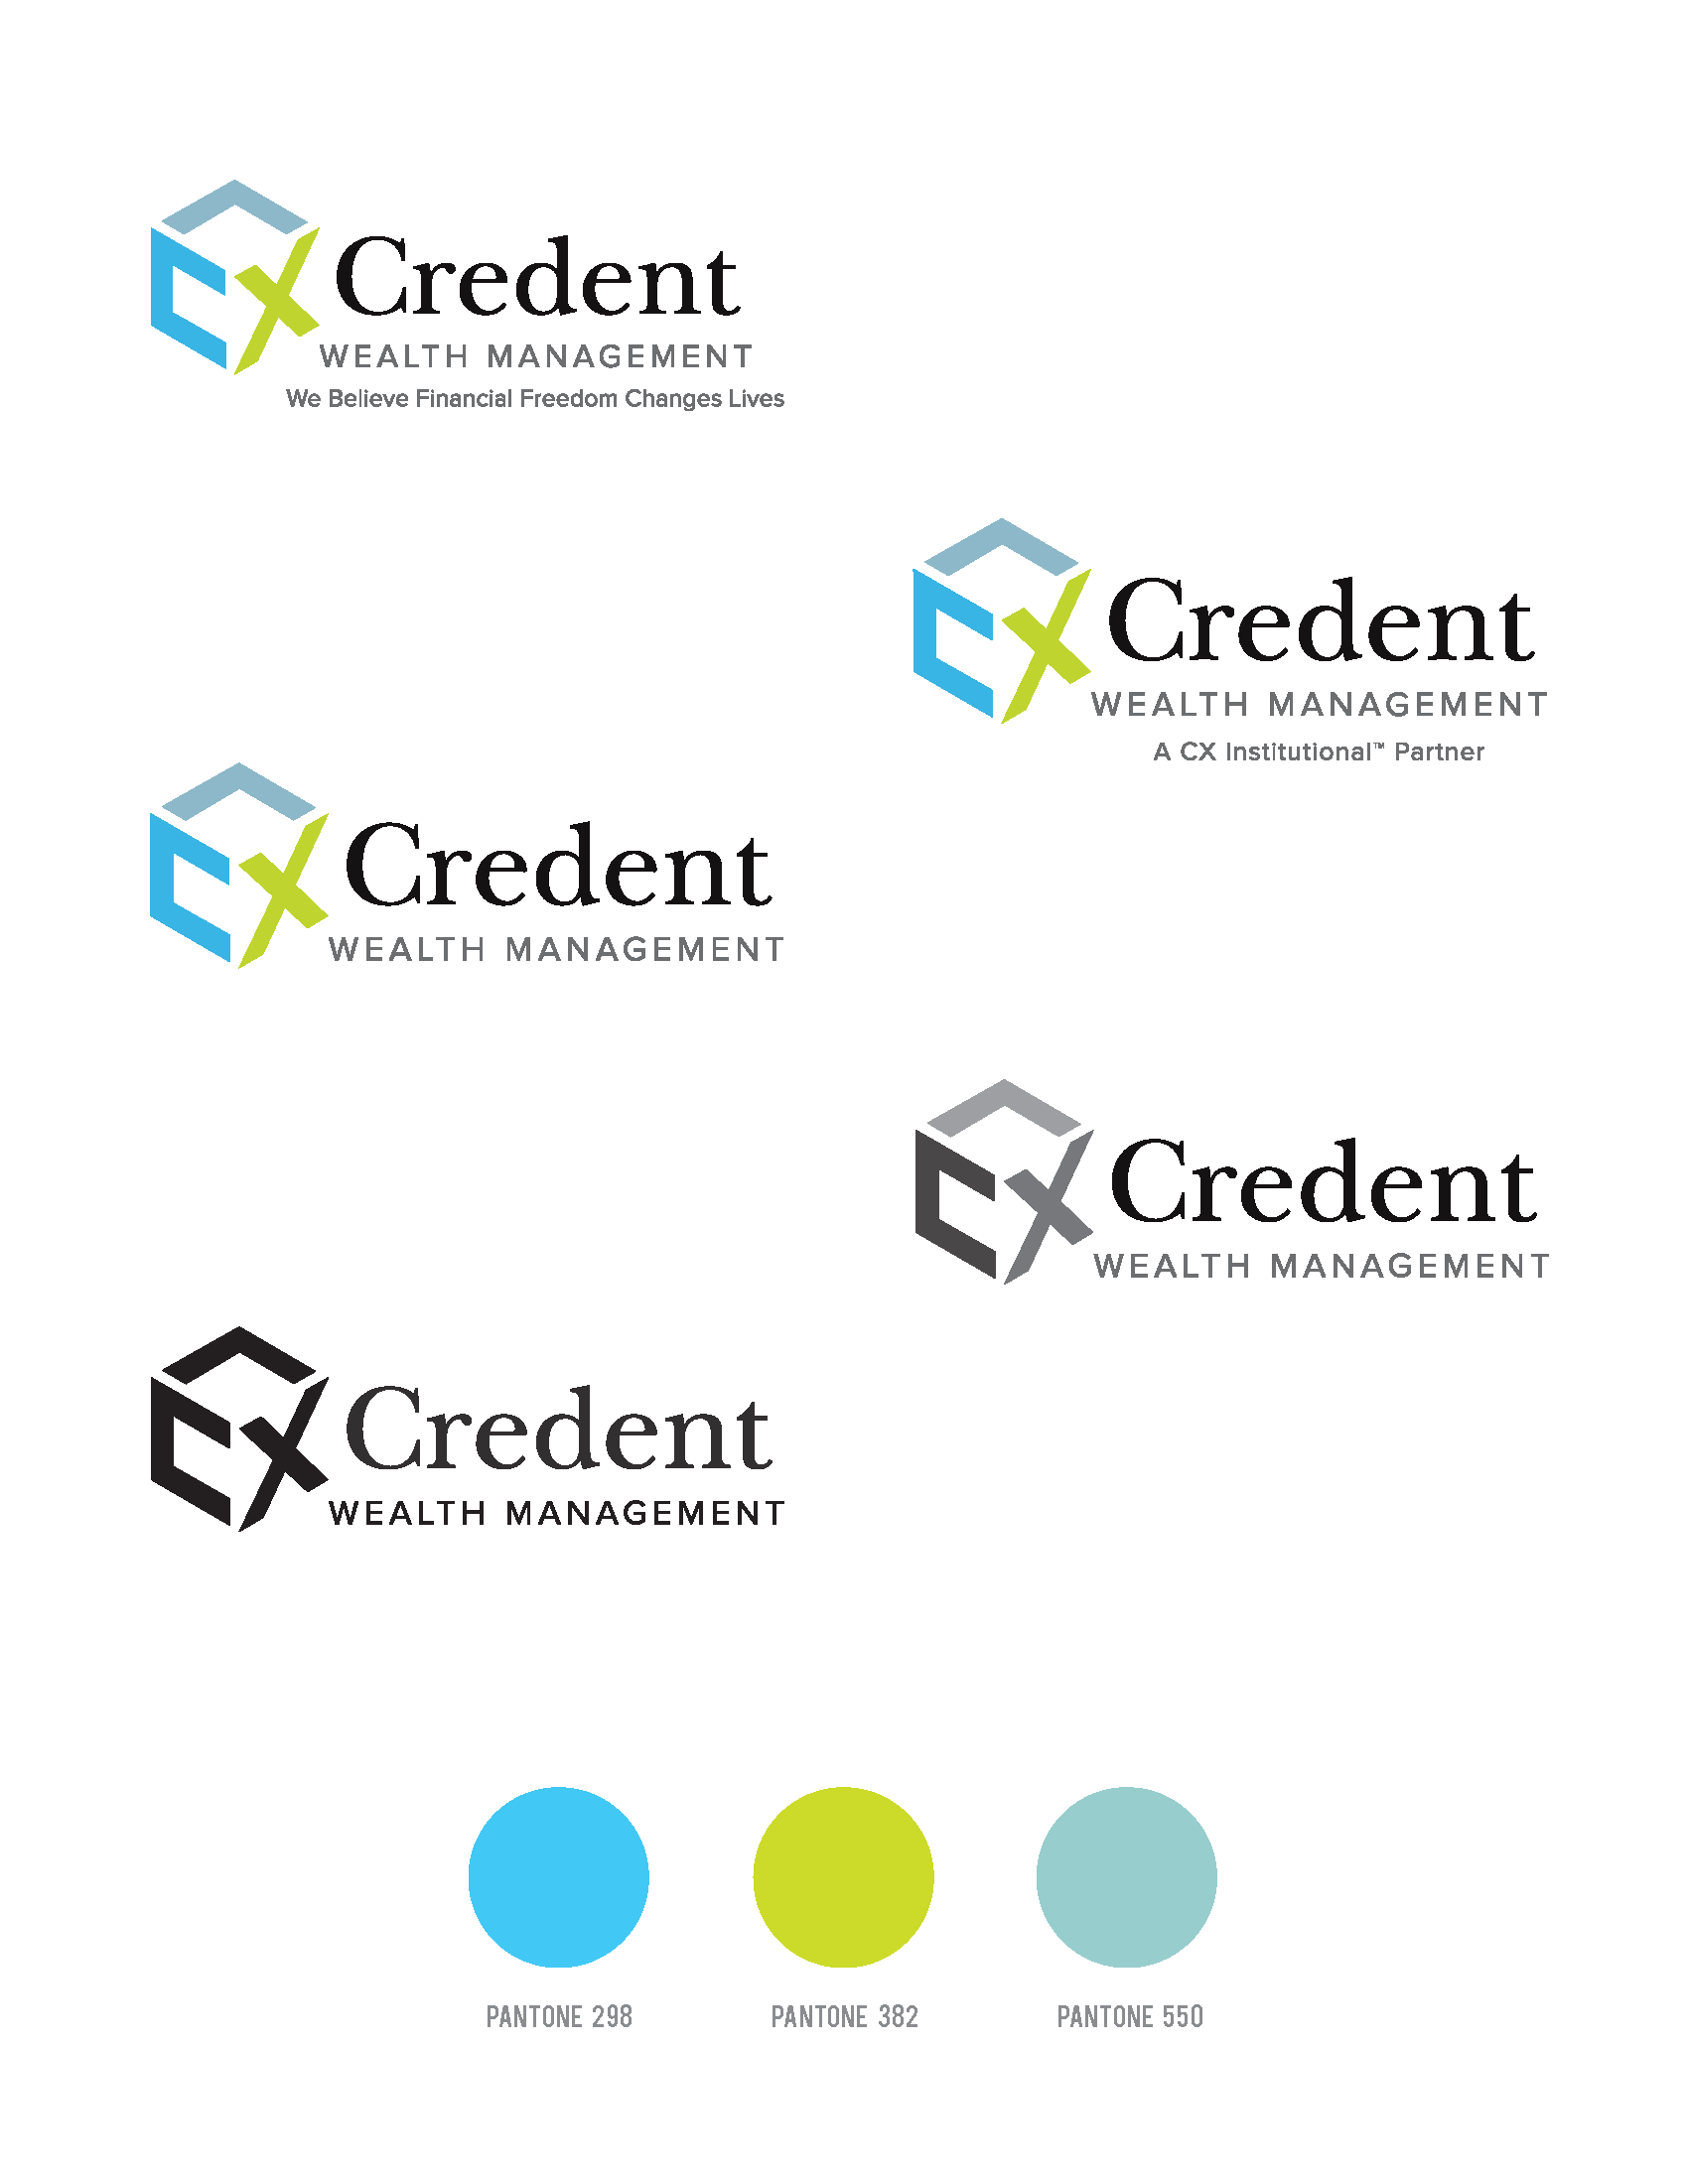 Credent Wealth Management Logo and Icon Design Submission